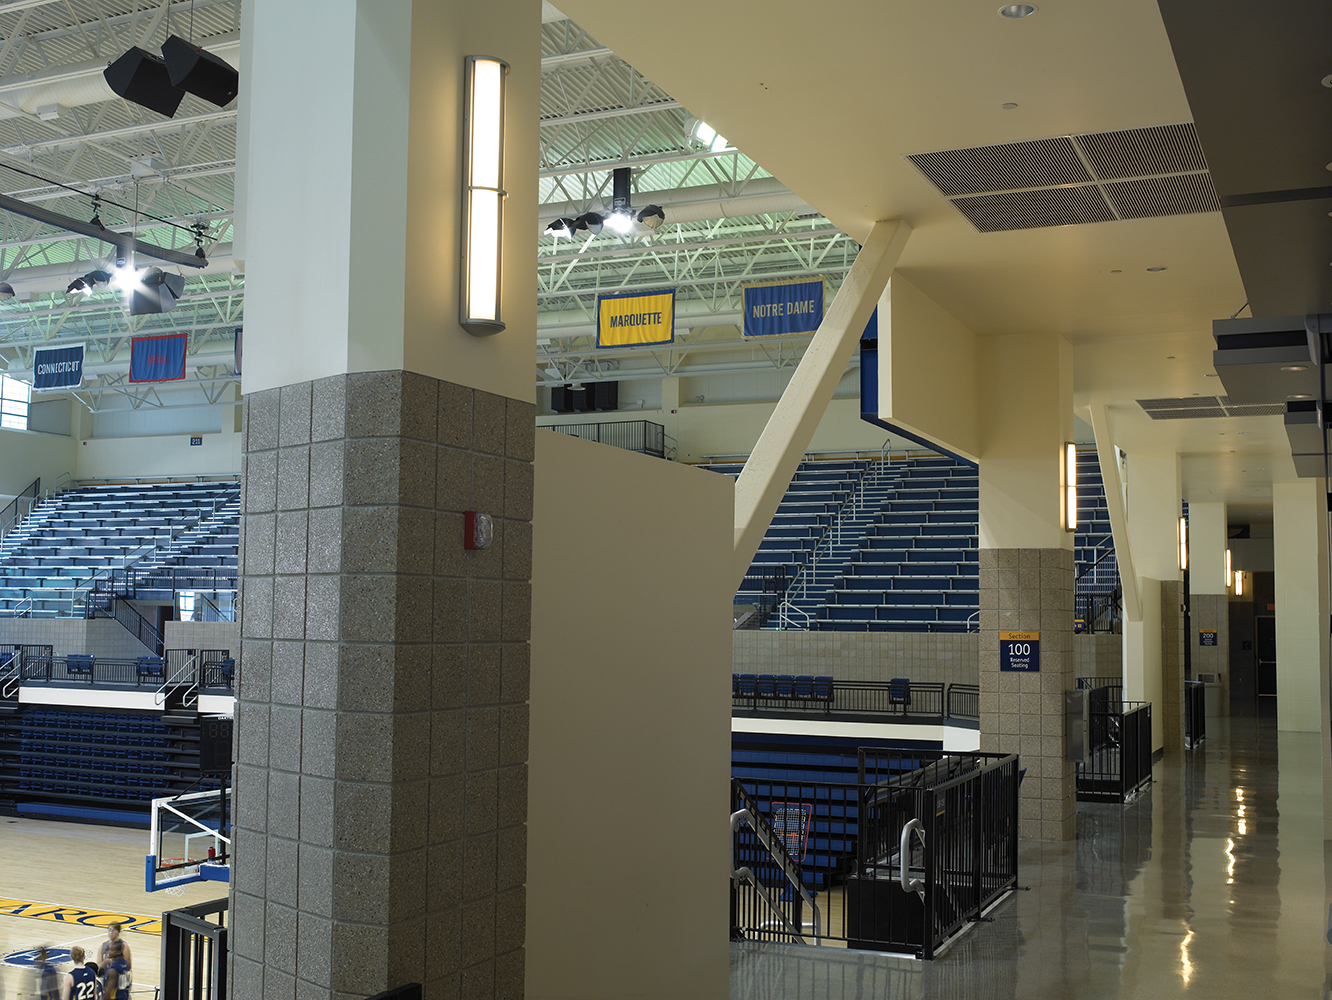 Avatar wall sconces with minimal accent provide modern lighting design for a college basketball gym.